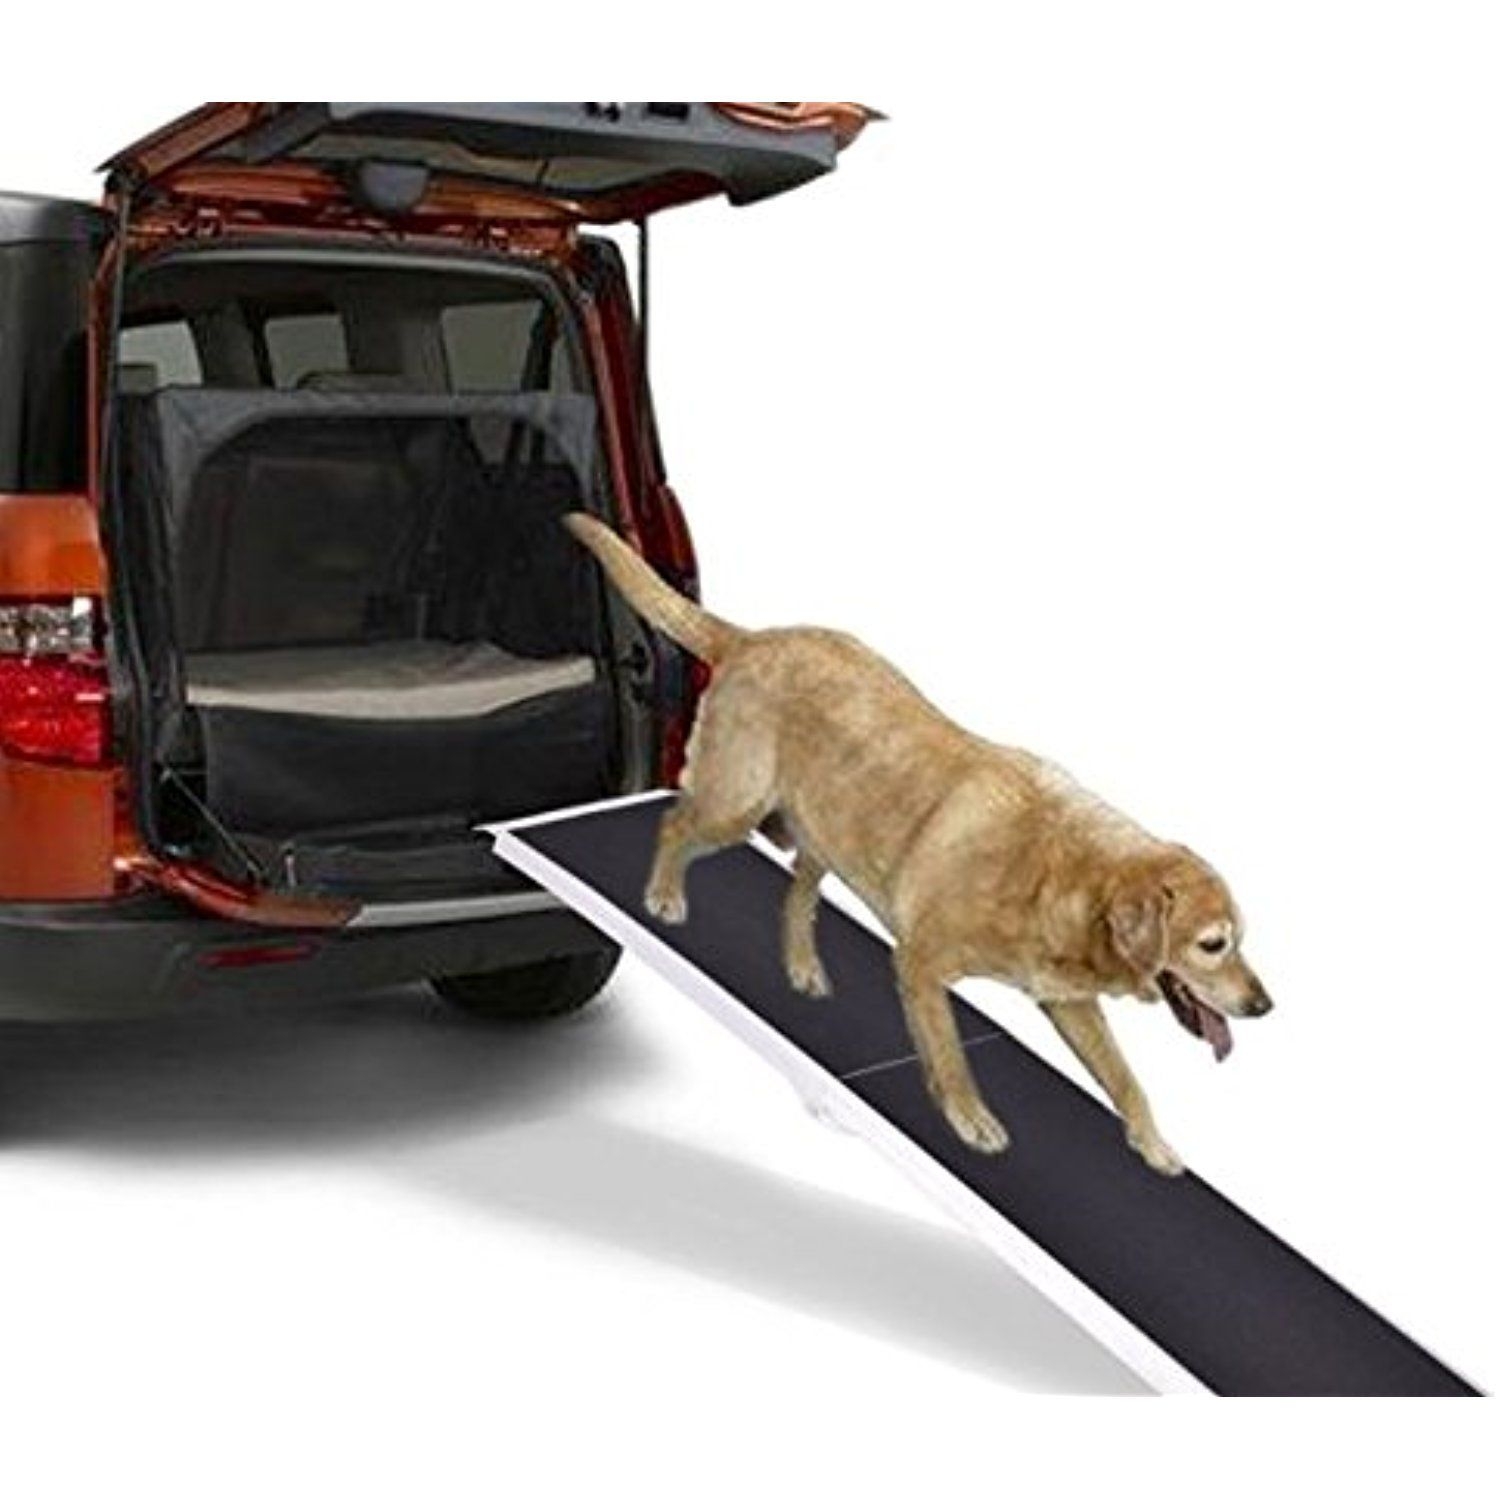 Dog Cat Pet Lightweight Portable Auto Stairs Ladder for Cars,Trucks and SUVs Folding Pet Ramp for Vehicle Door Back Seat Side Entry Rocomoco Pet Car Step Stairs 